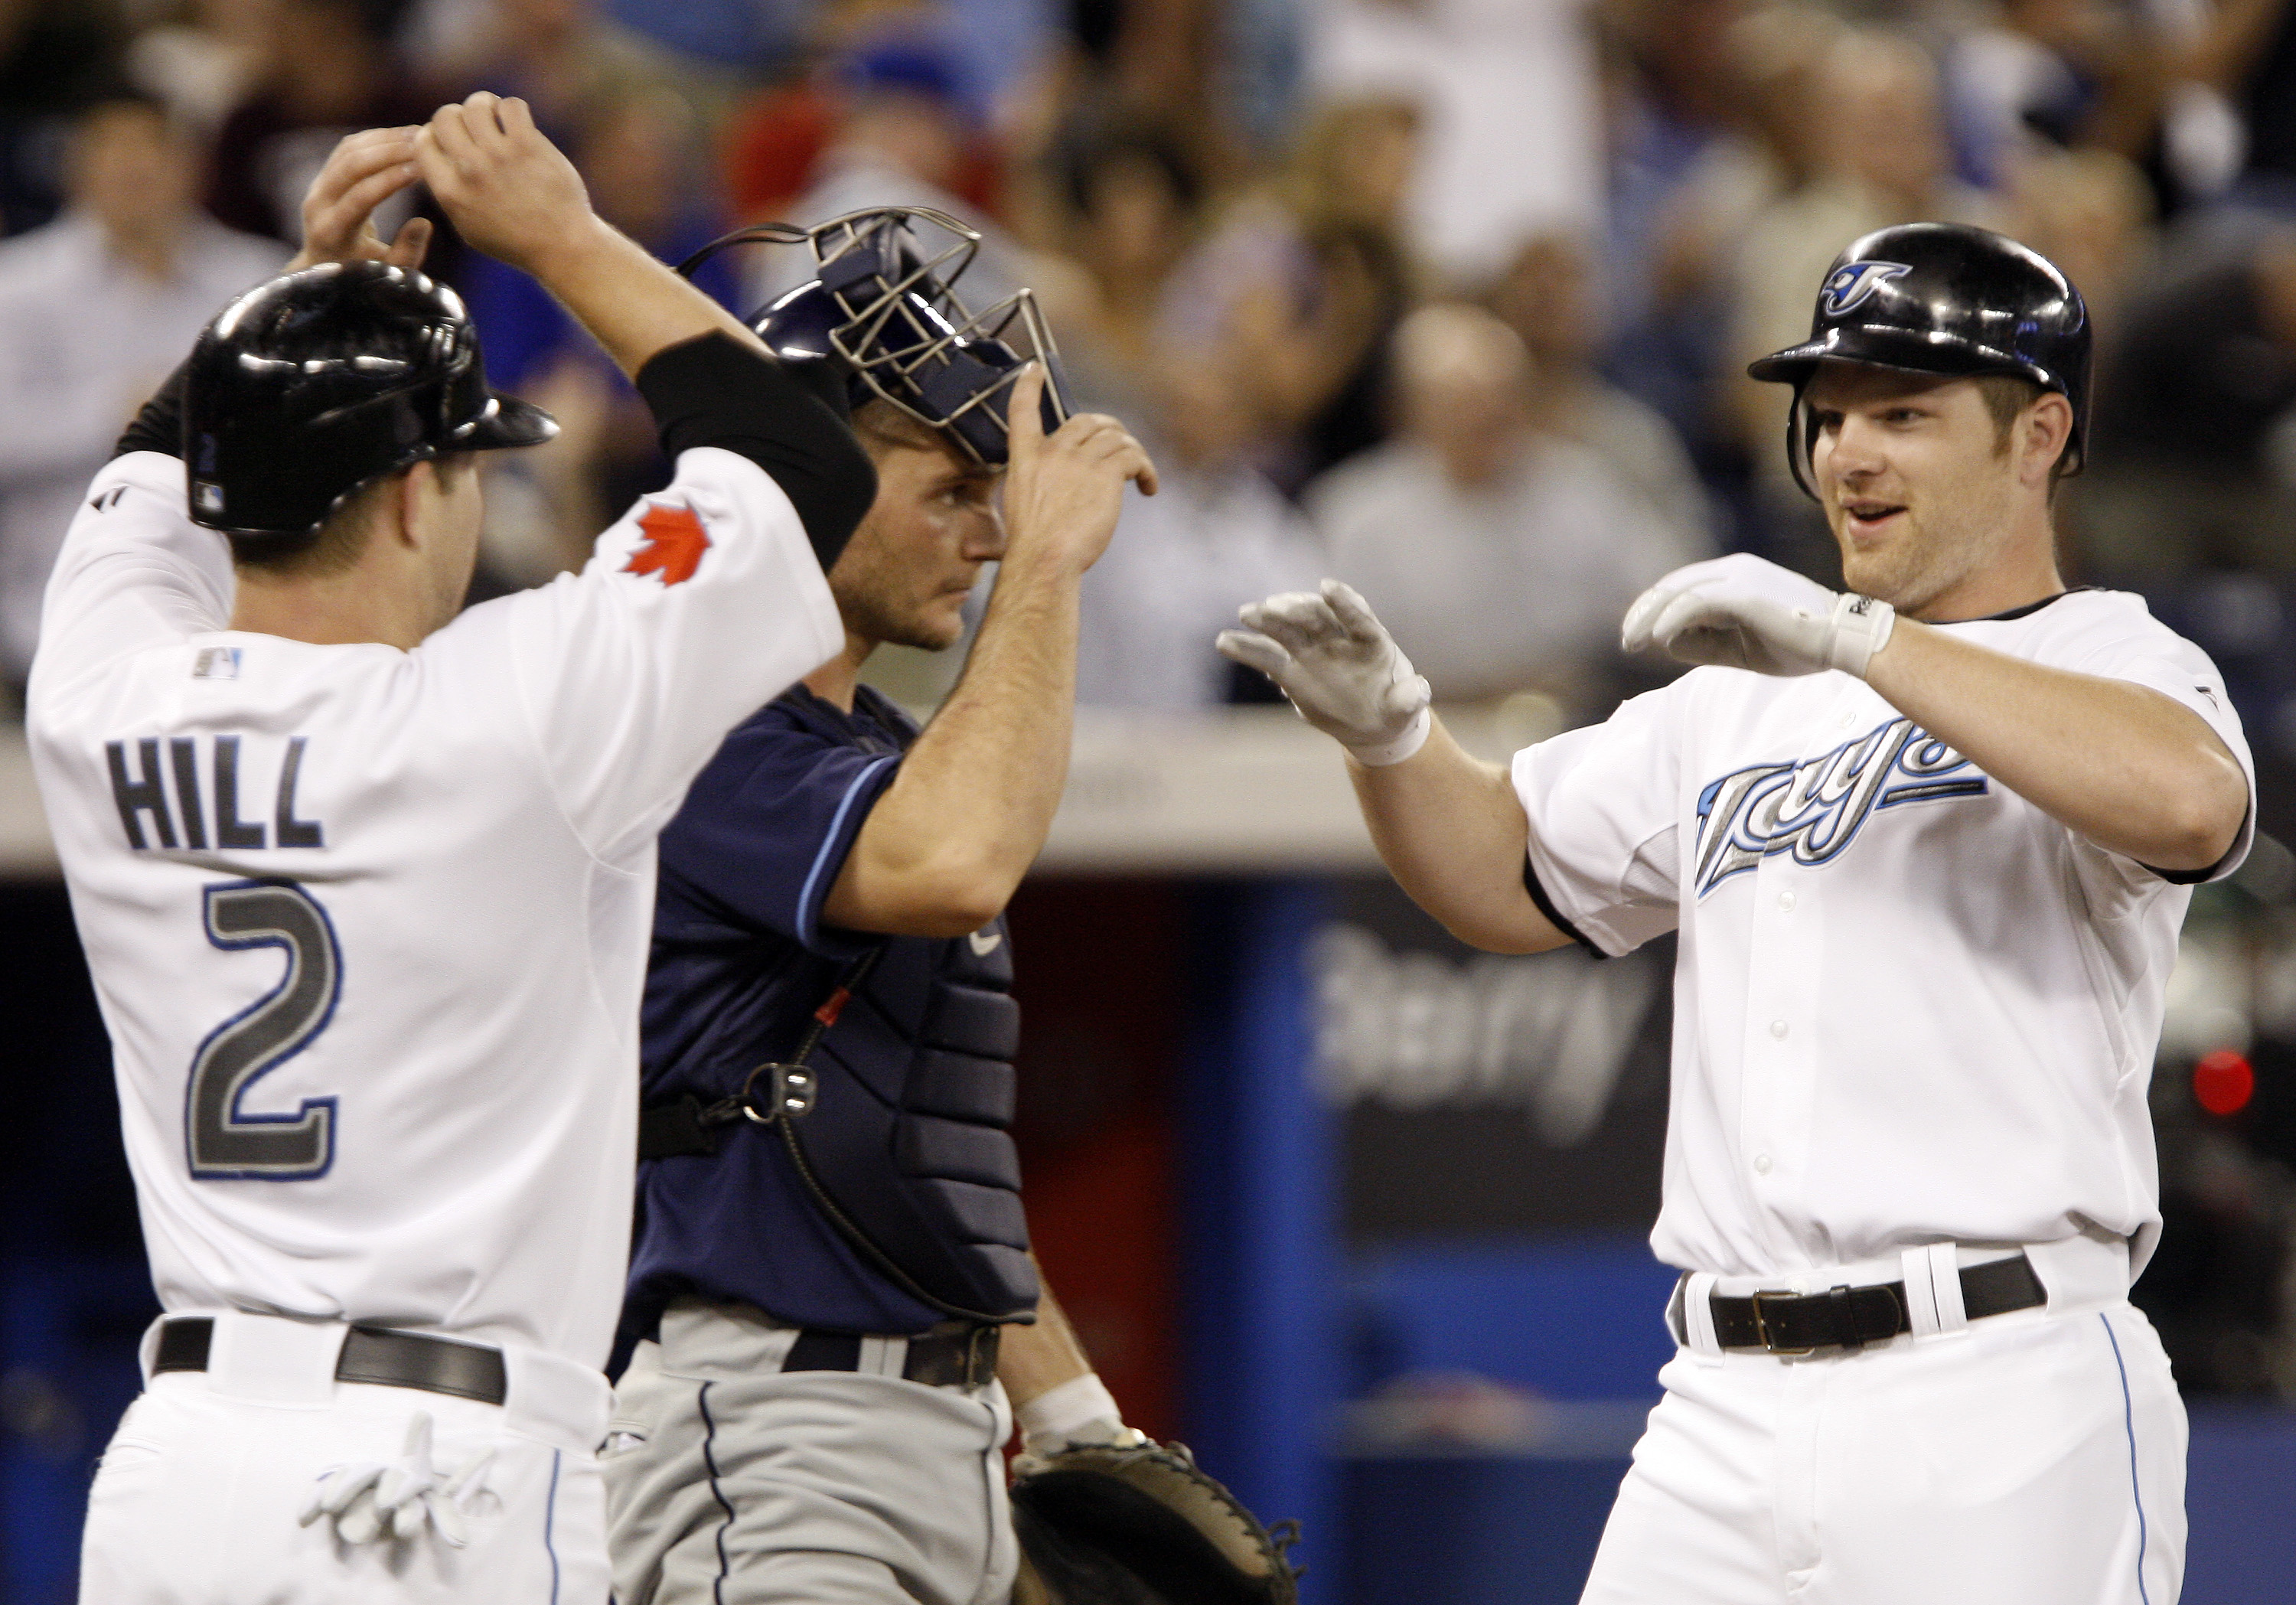 TORONTO - MAY 31: Adam Lind #26 and Aaron Hill #2 of the Toronto Blue Jays celebrate a two-run home run by Lind against the Tampa Bay Rays at the Rogers Centre during an MLB game May 31, 2010 in Toronto, Ontario, Canada. (Photo by Abelimages/Getty Images)